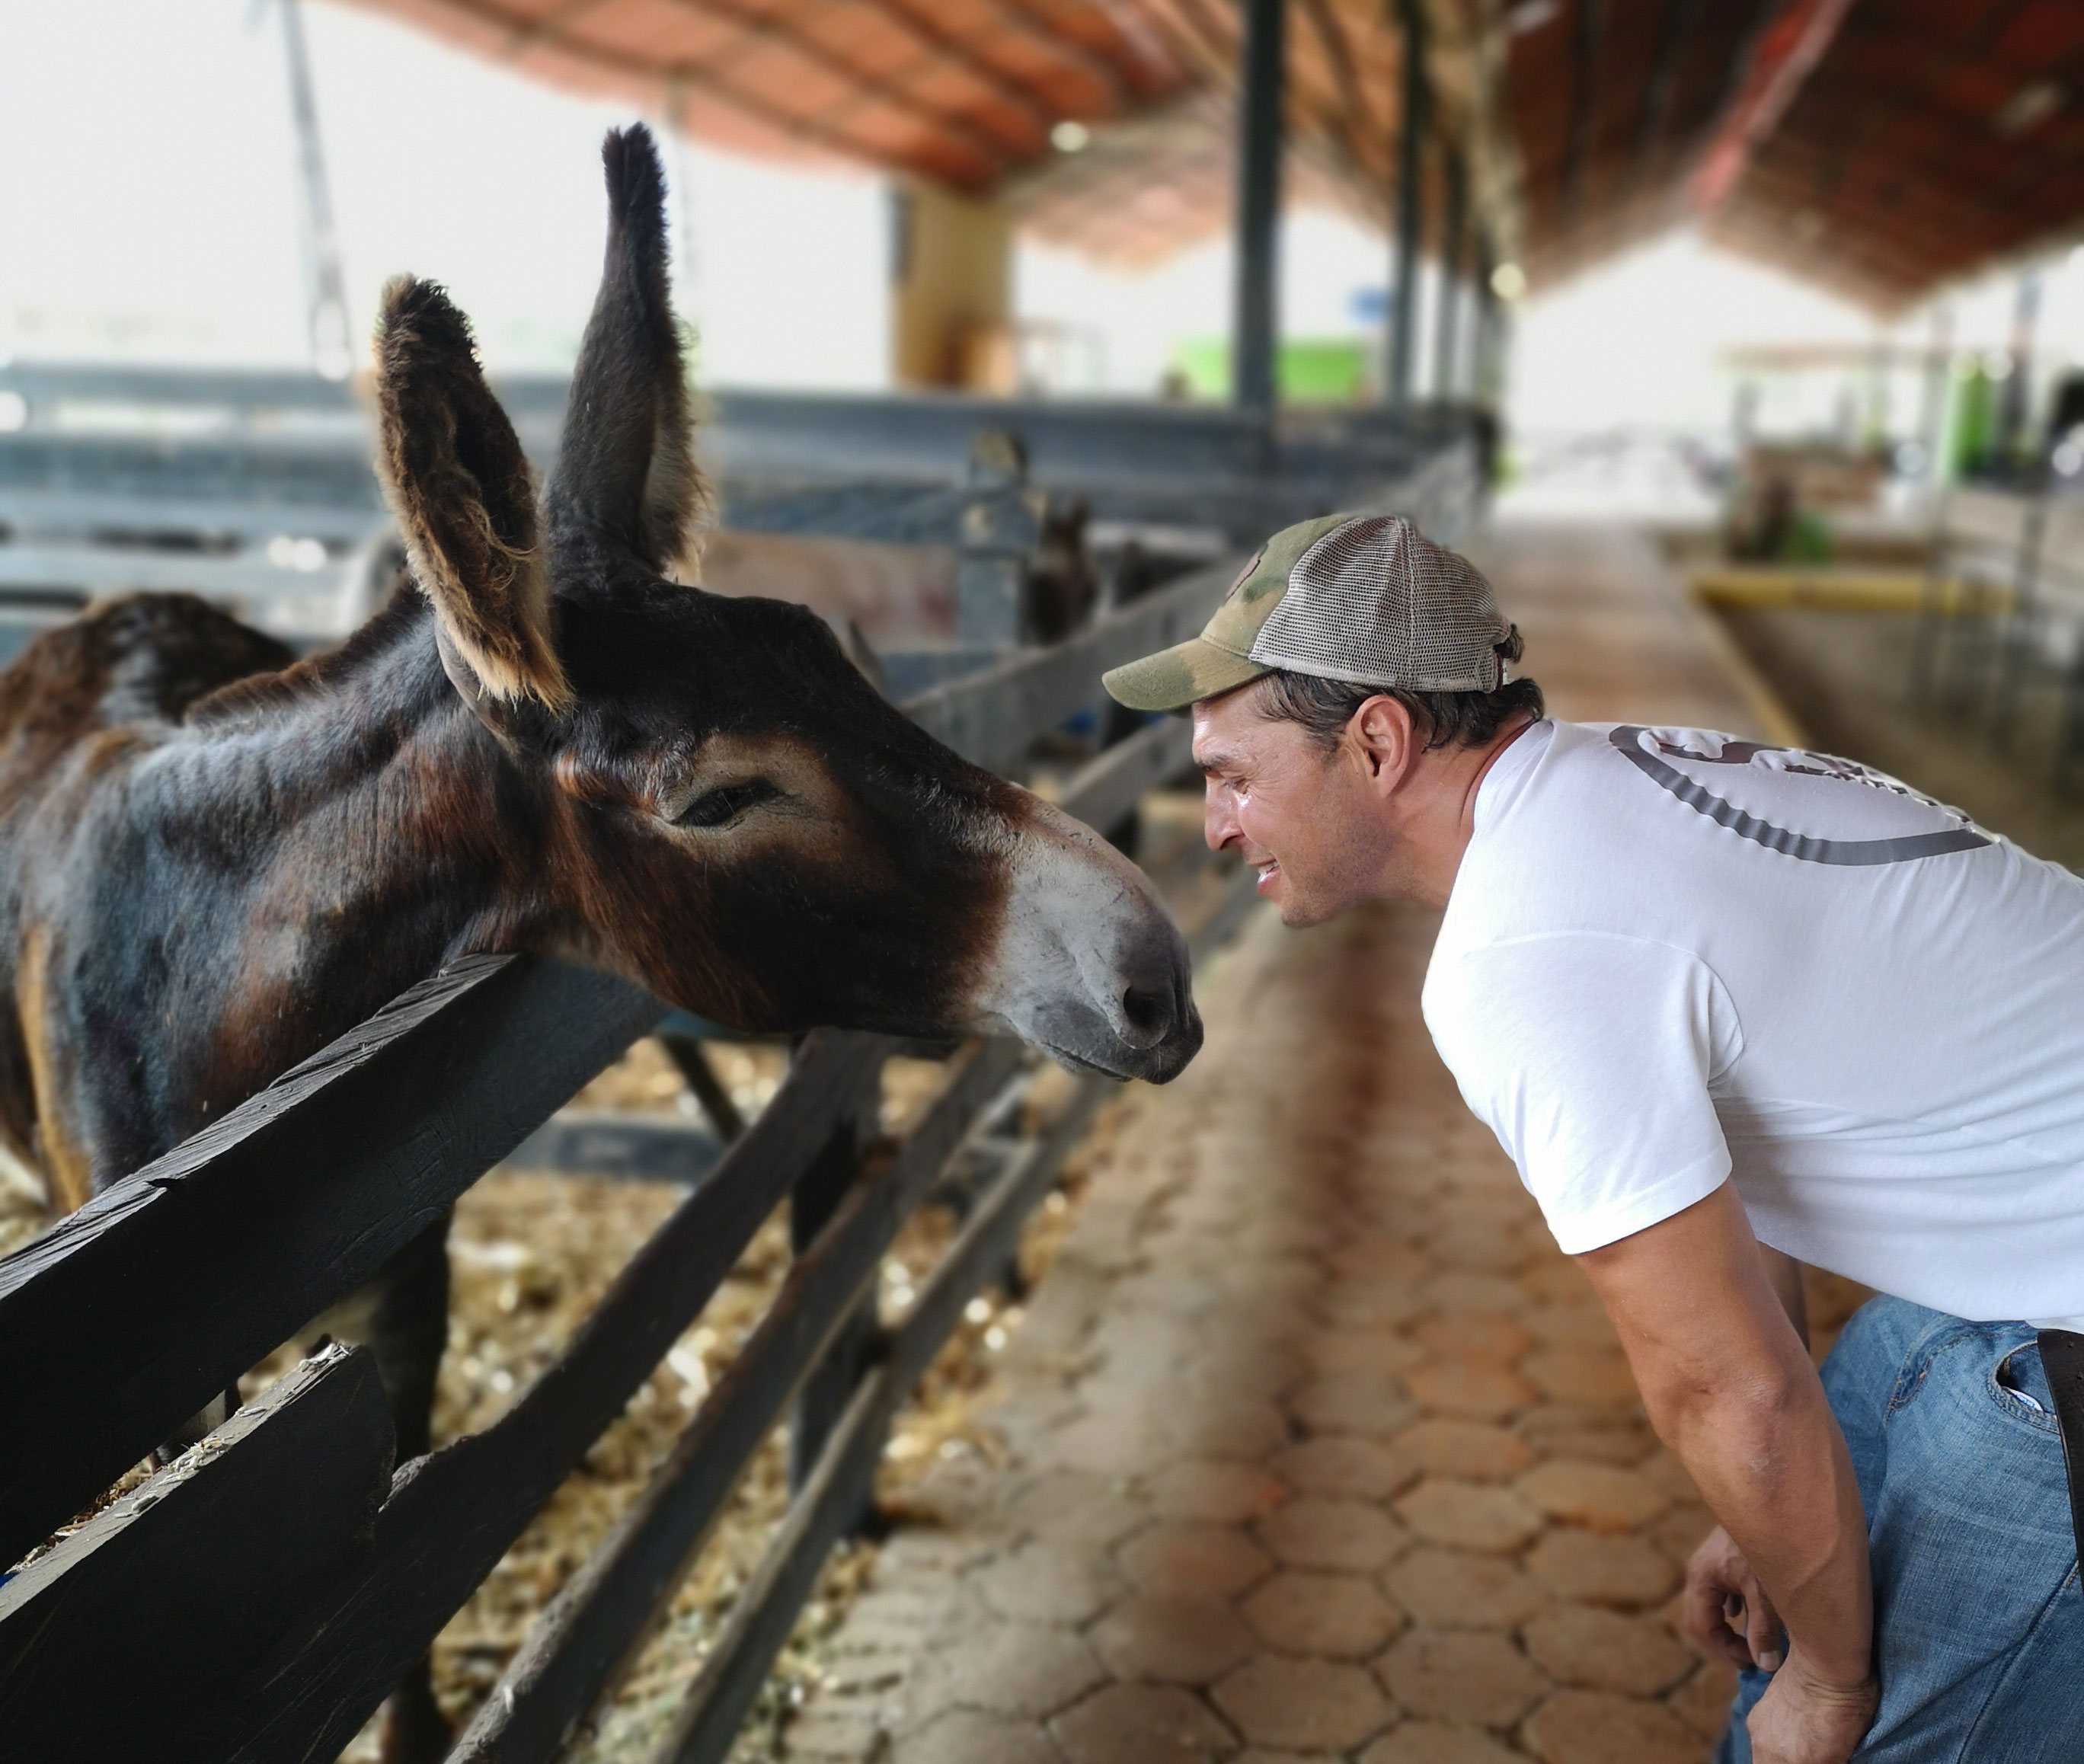 Man in white t-shirt and baseball cap leans in nose to nose with a curious and happy looking donkey with very long ears